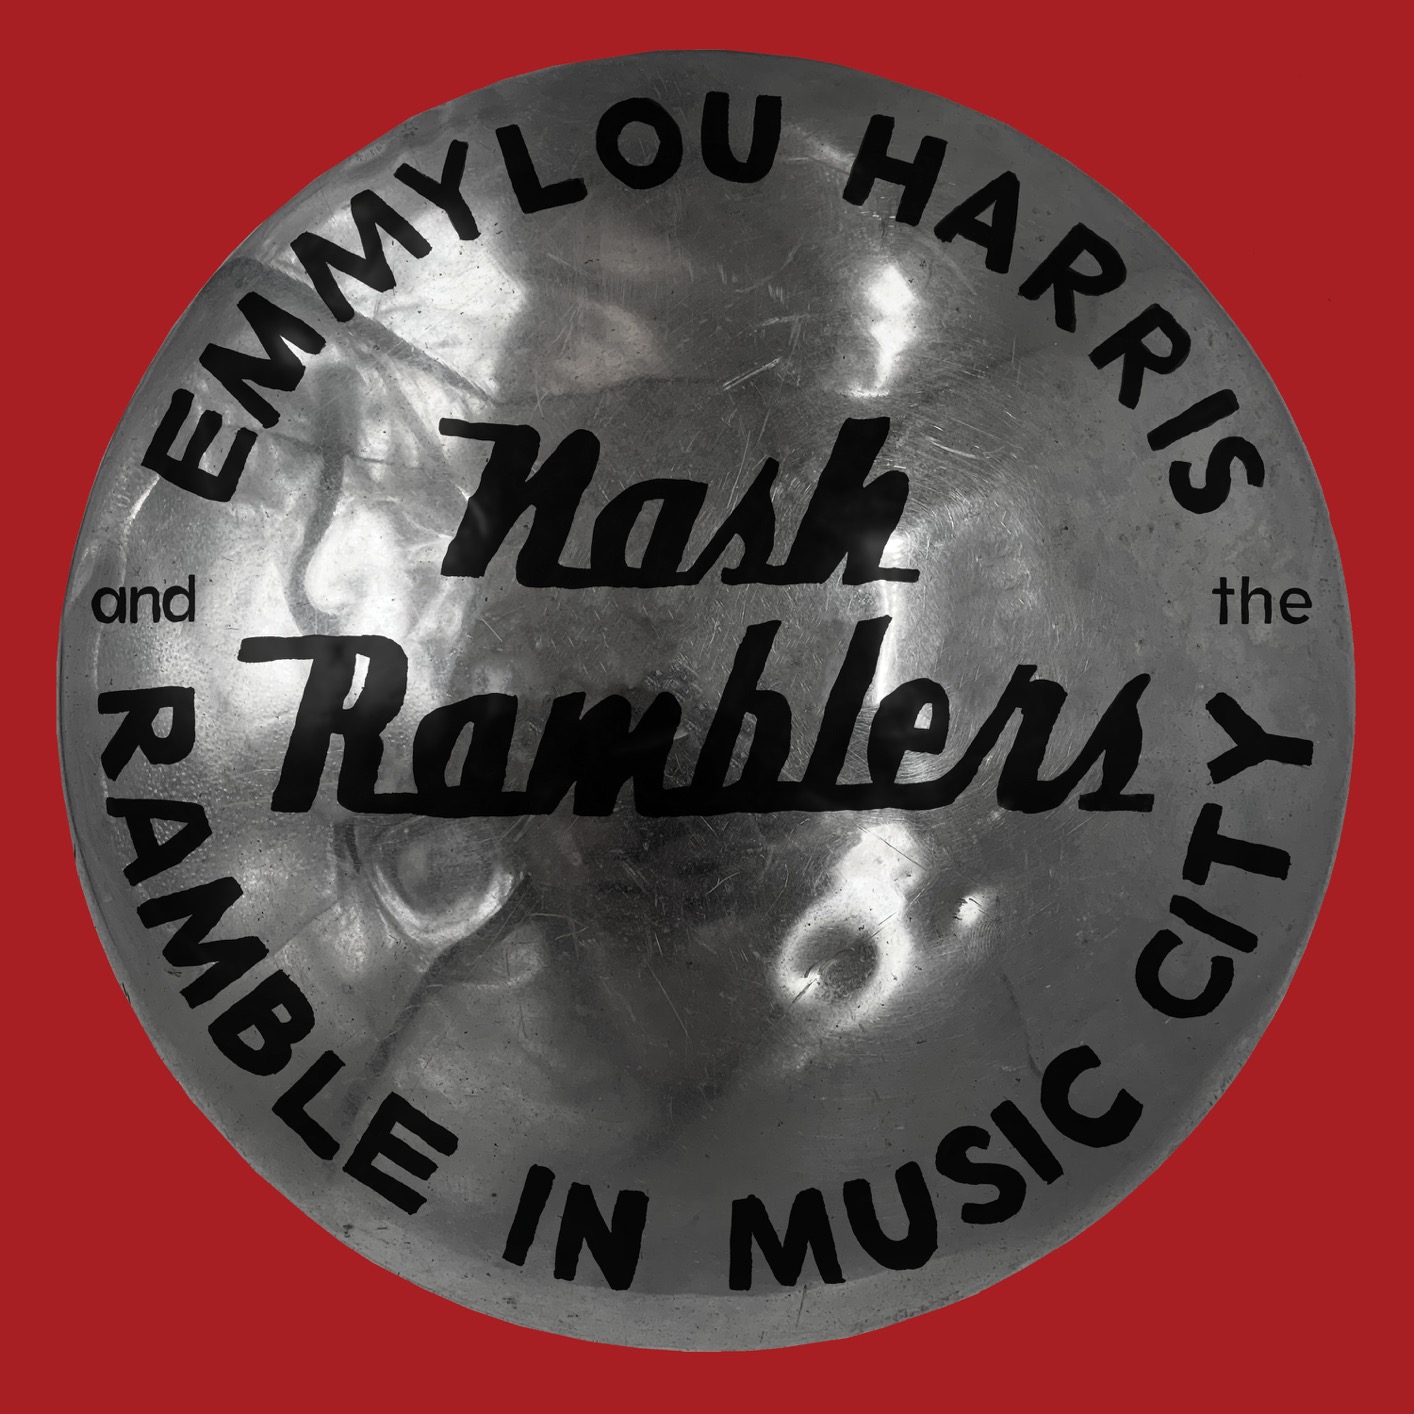 Emmylou Harris & The Nash Ramblers - Ramble in Music City: The Lost Concert (Live) (2021) [FLAC 24bit/96kHz]